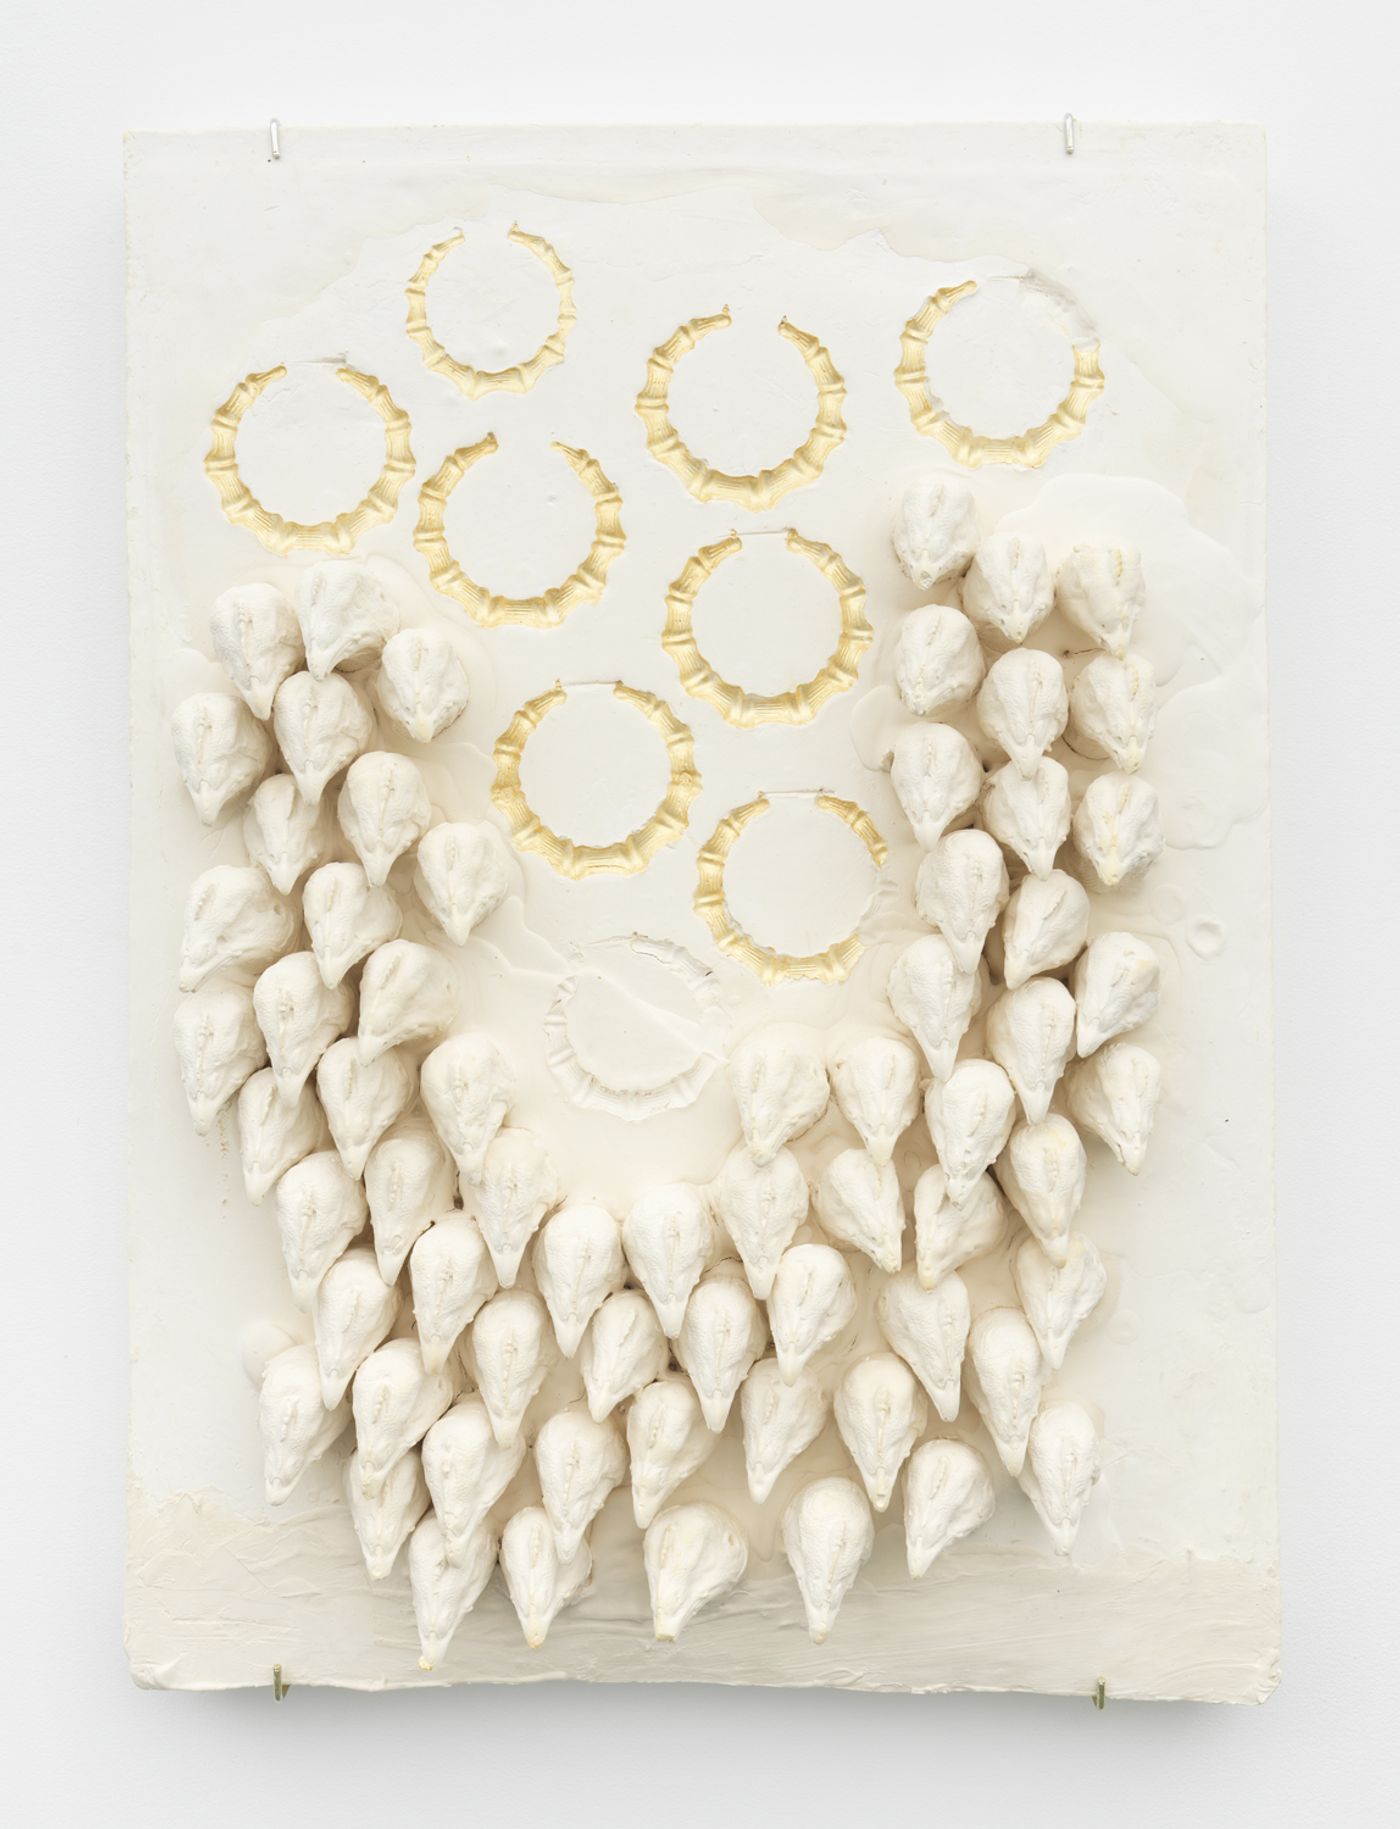 Image of Composition with Chicken Heads and Round Bamboo Earrings, Impressed with Gold , 2019: Plaster, foam, and acrylic